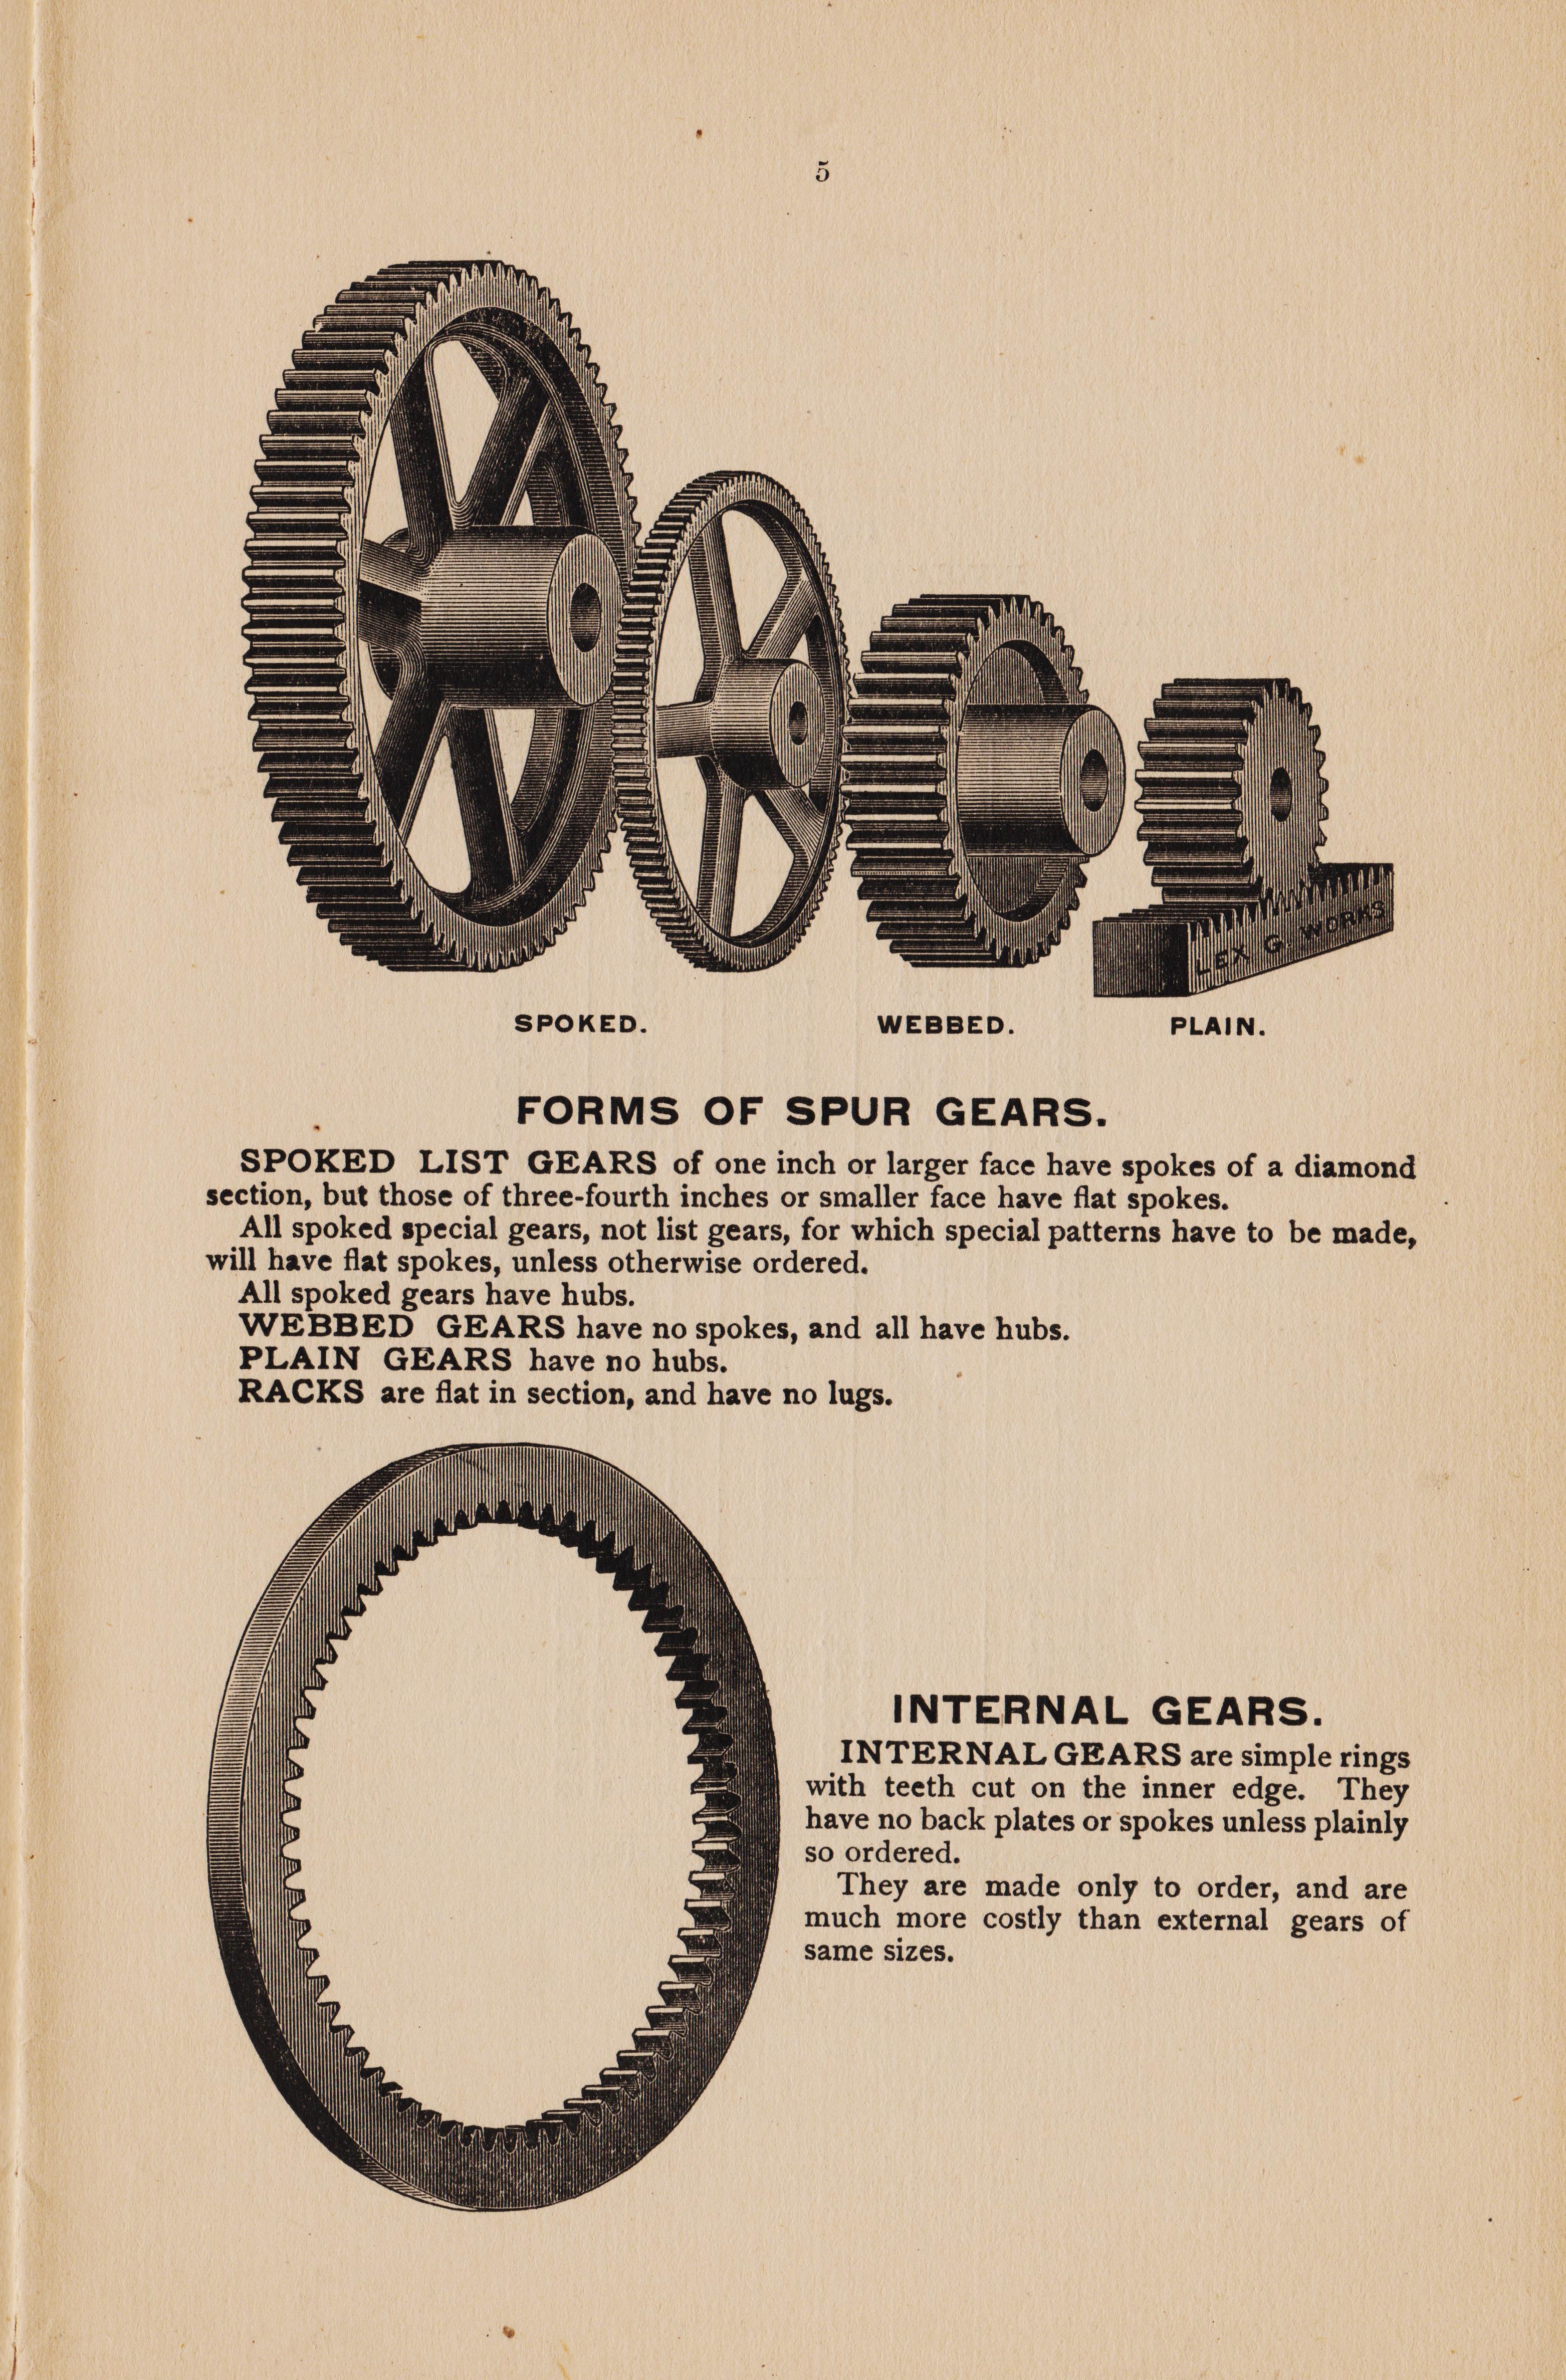 http://antiquemachinery.com/images-2020/Grants-Gear-Book-Lexington-Gear-Works-1892-page-5-Forms-of-gears.jpg